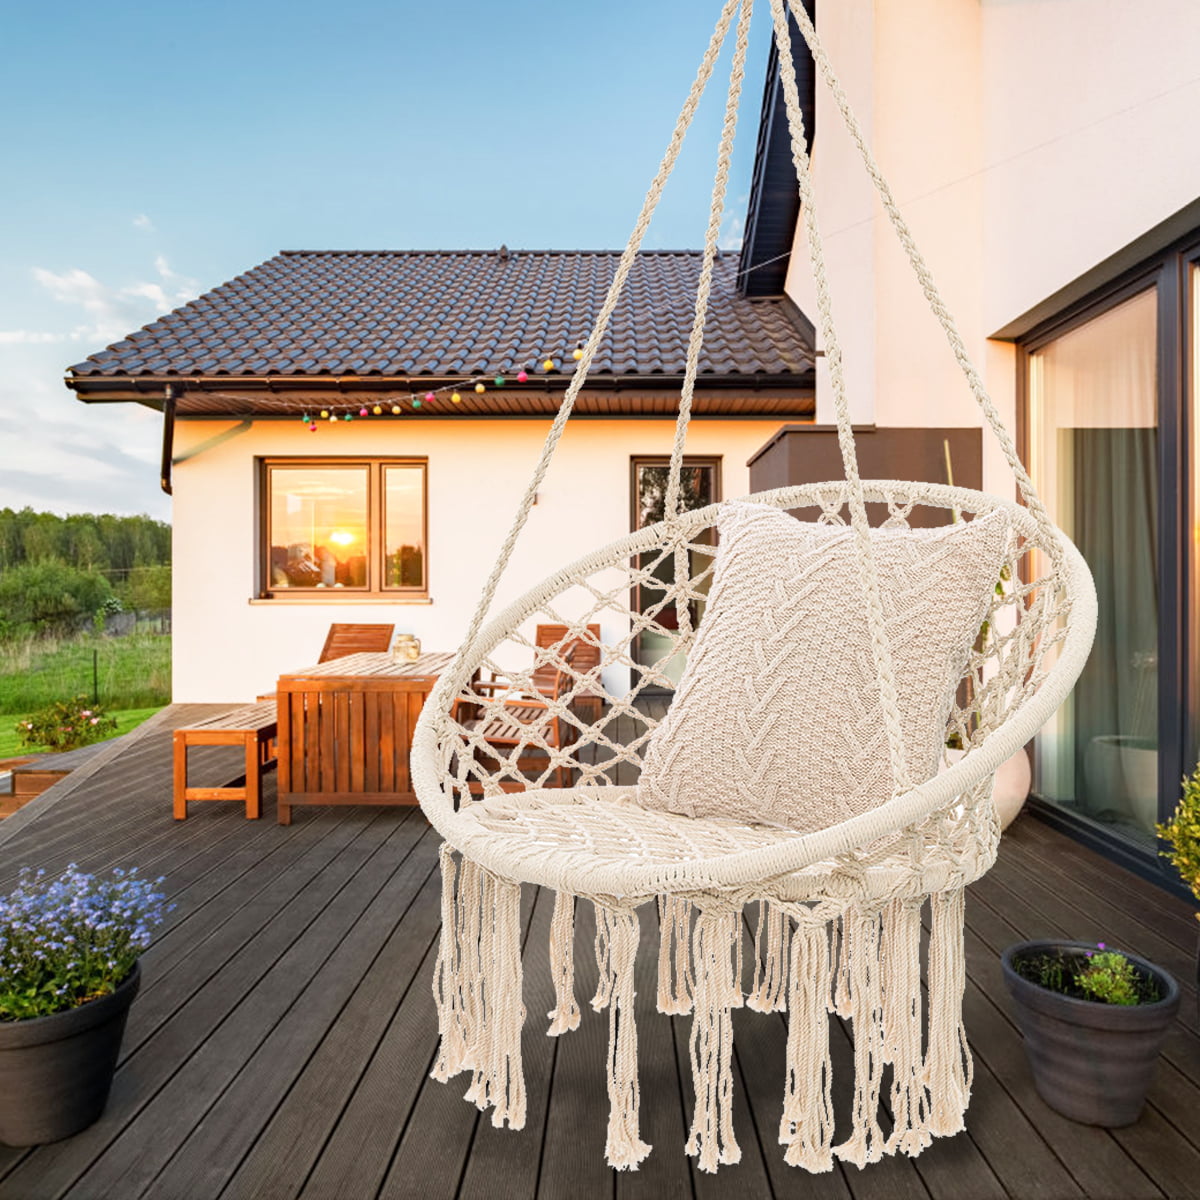 outdoor hanging swing cotton hammock chair solid mesh woven rope yard patio  porch garden wooden bar chair swing patio chair home decor gift